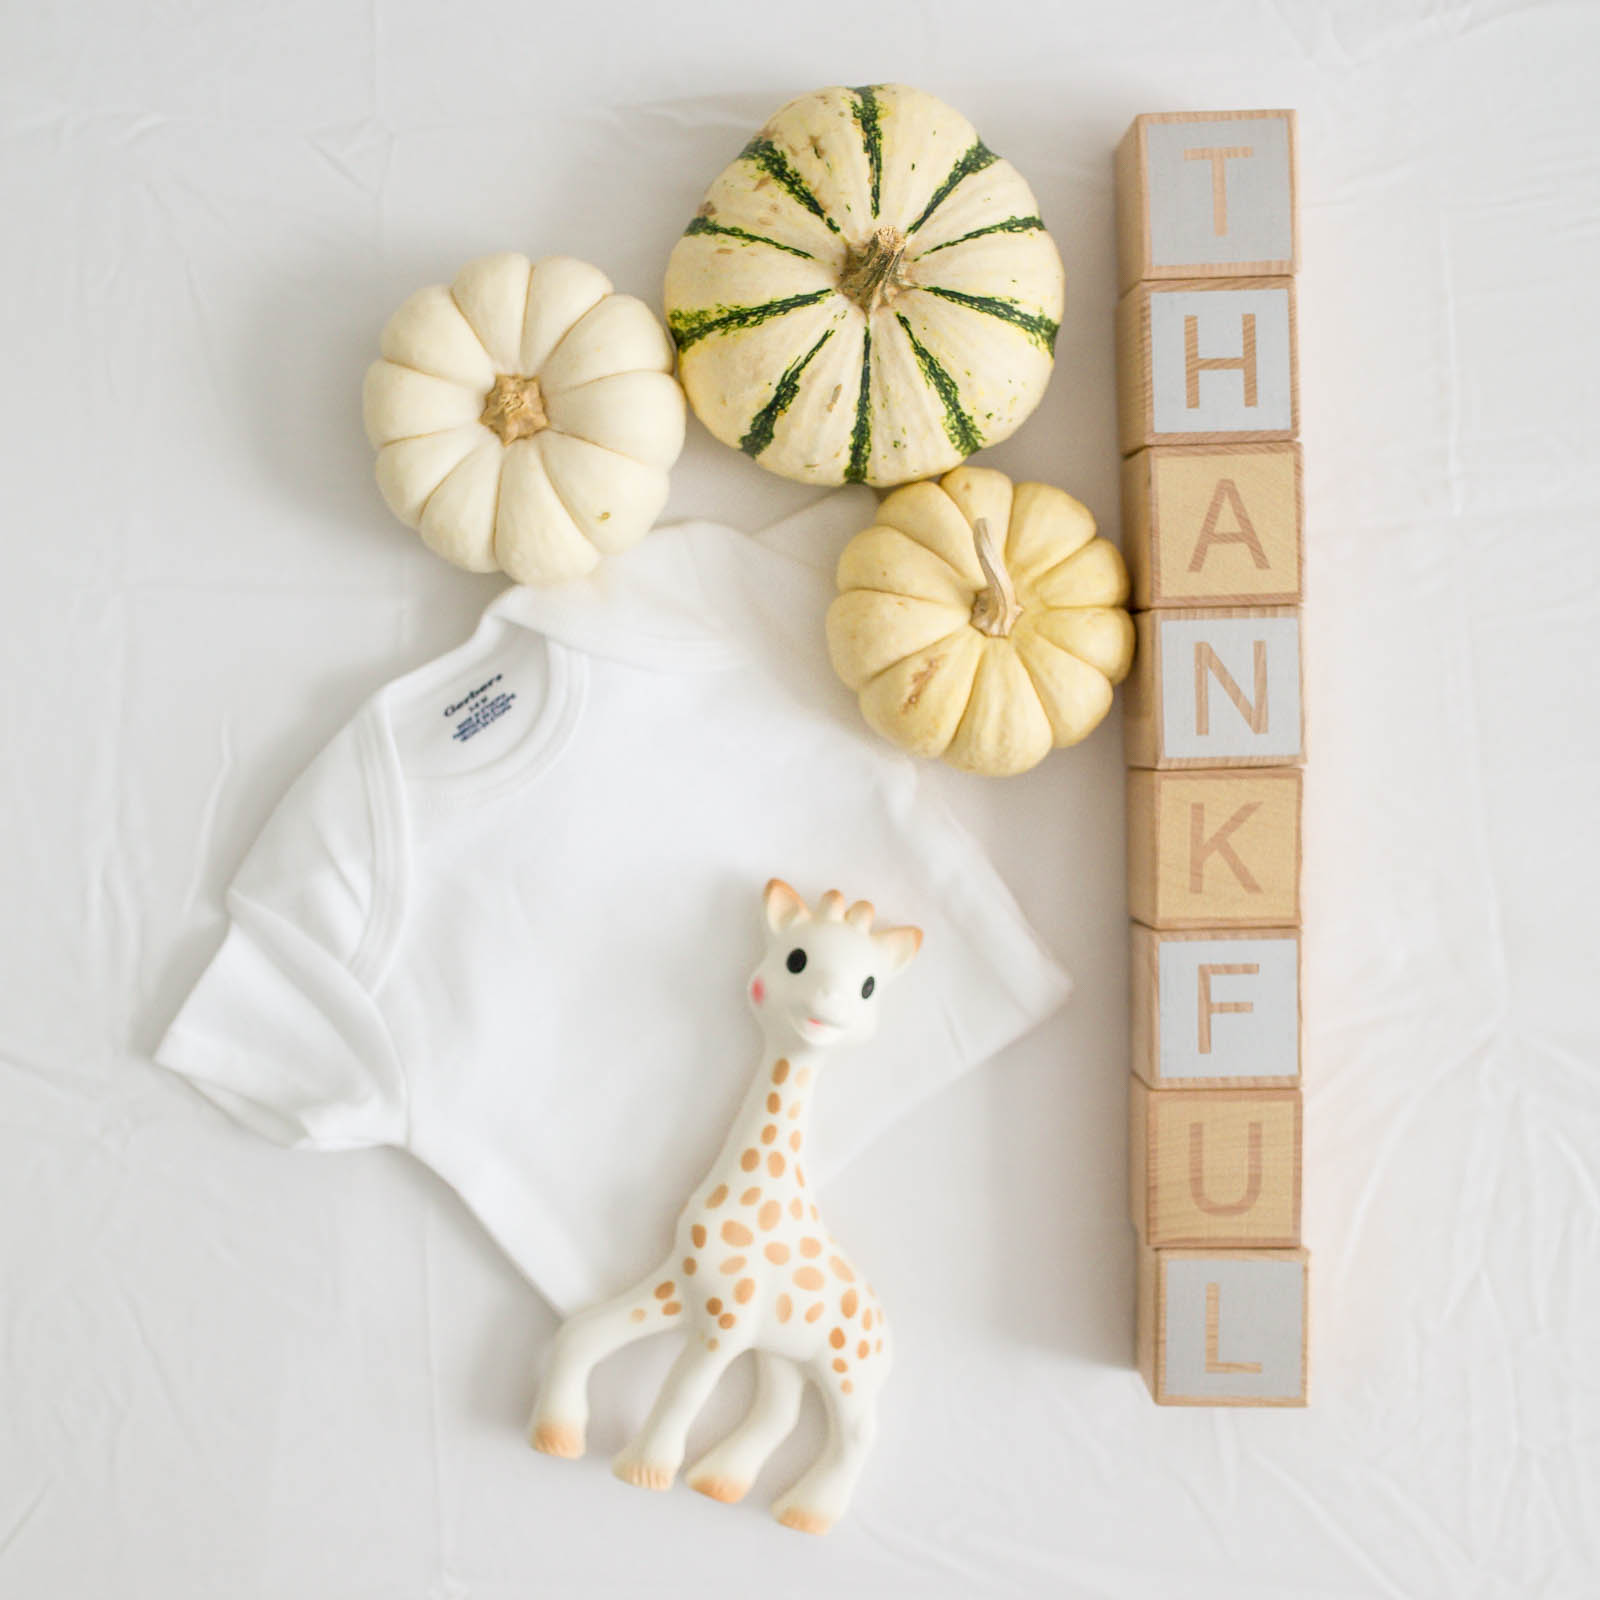 THANKFUL baby flatlay - black friday cyber weekend cyber monday sale roundup